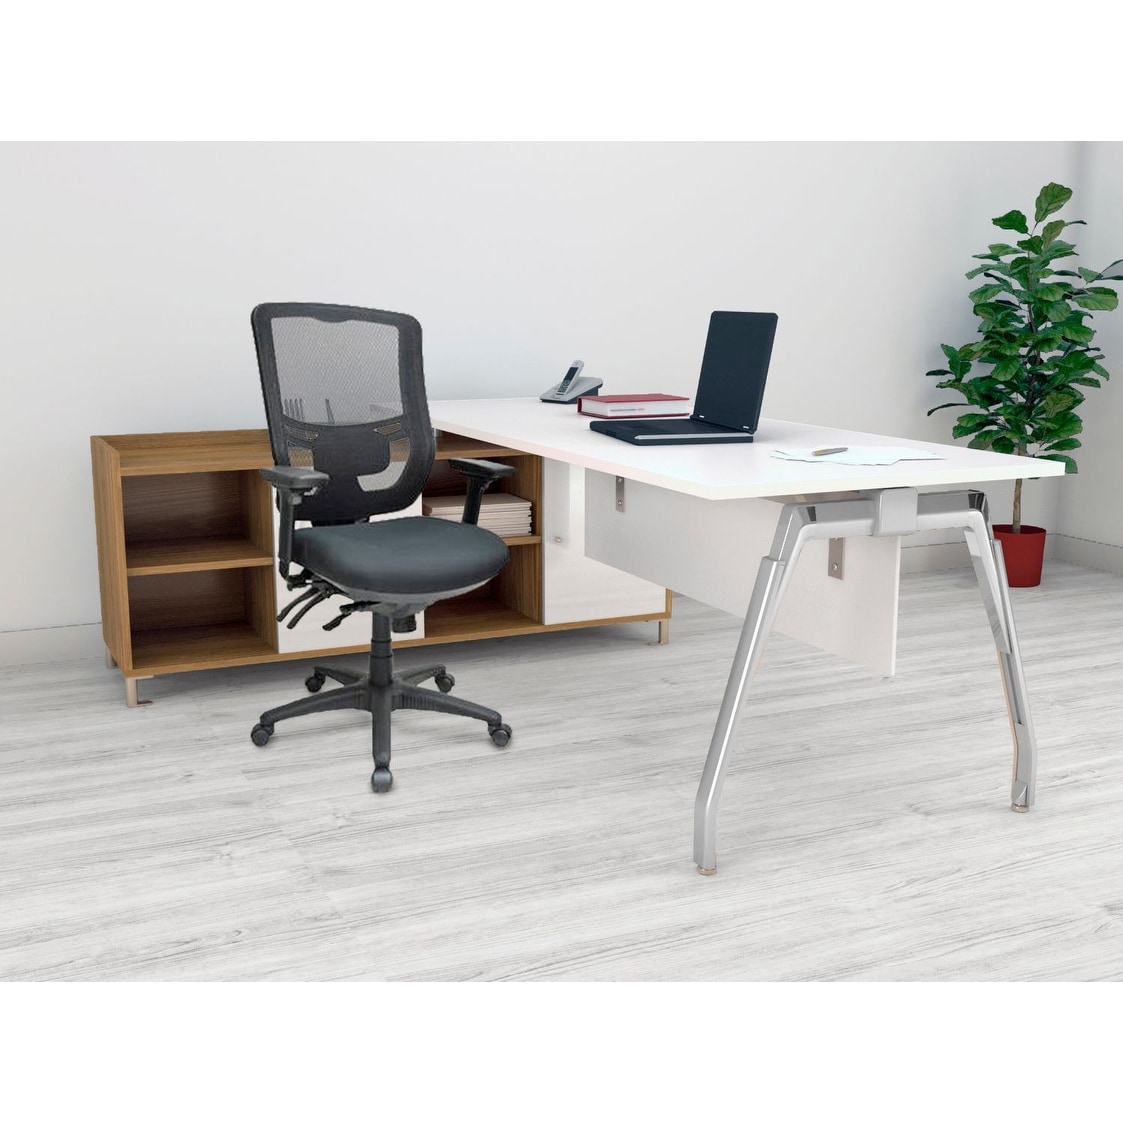 https://ak1.ostkcdn.com/images/products/is/images/direct/4b7b6070fdd91fbe922b04eedf84052b24e8fad7/Tempur-Pedic%C2%AE-Fully-Adjustable-Task-Chair-with-Cool-Mesh-Back.jpg